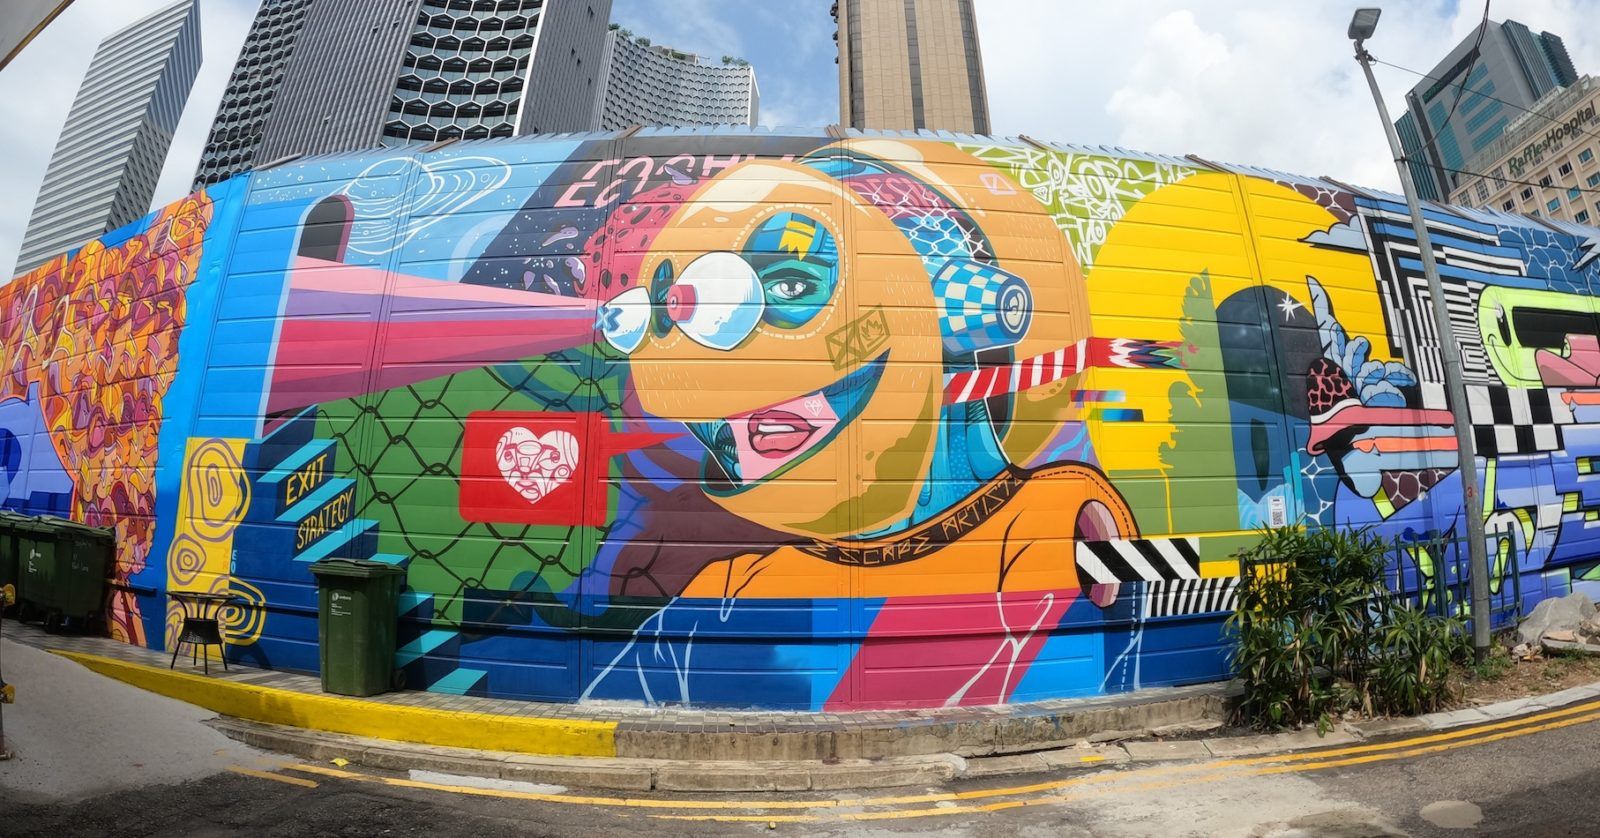 Want to try your hand at graffiti? This street art workshop lets you do just that